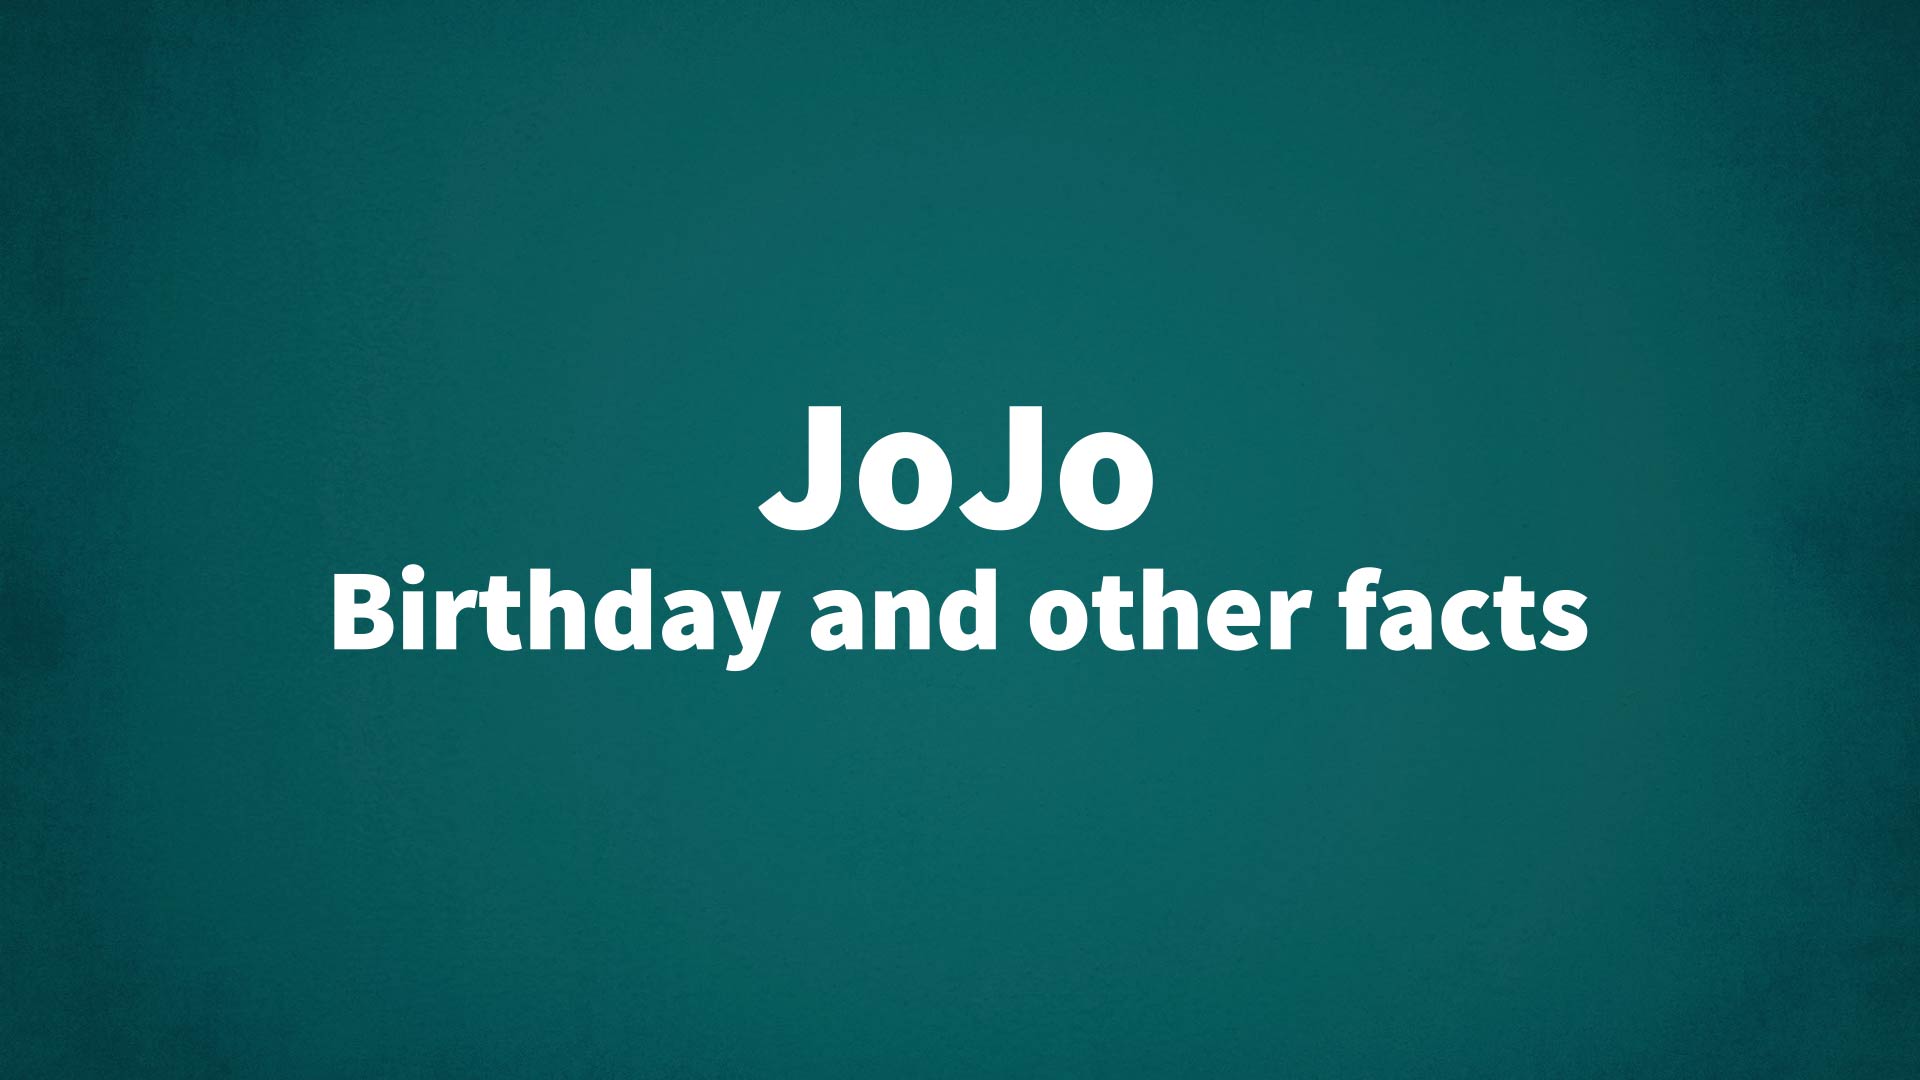 JoJo - Birthday and other facts